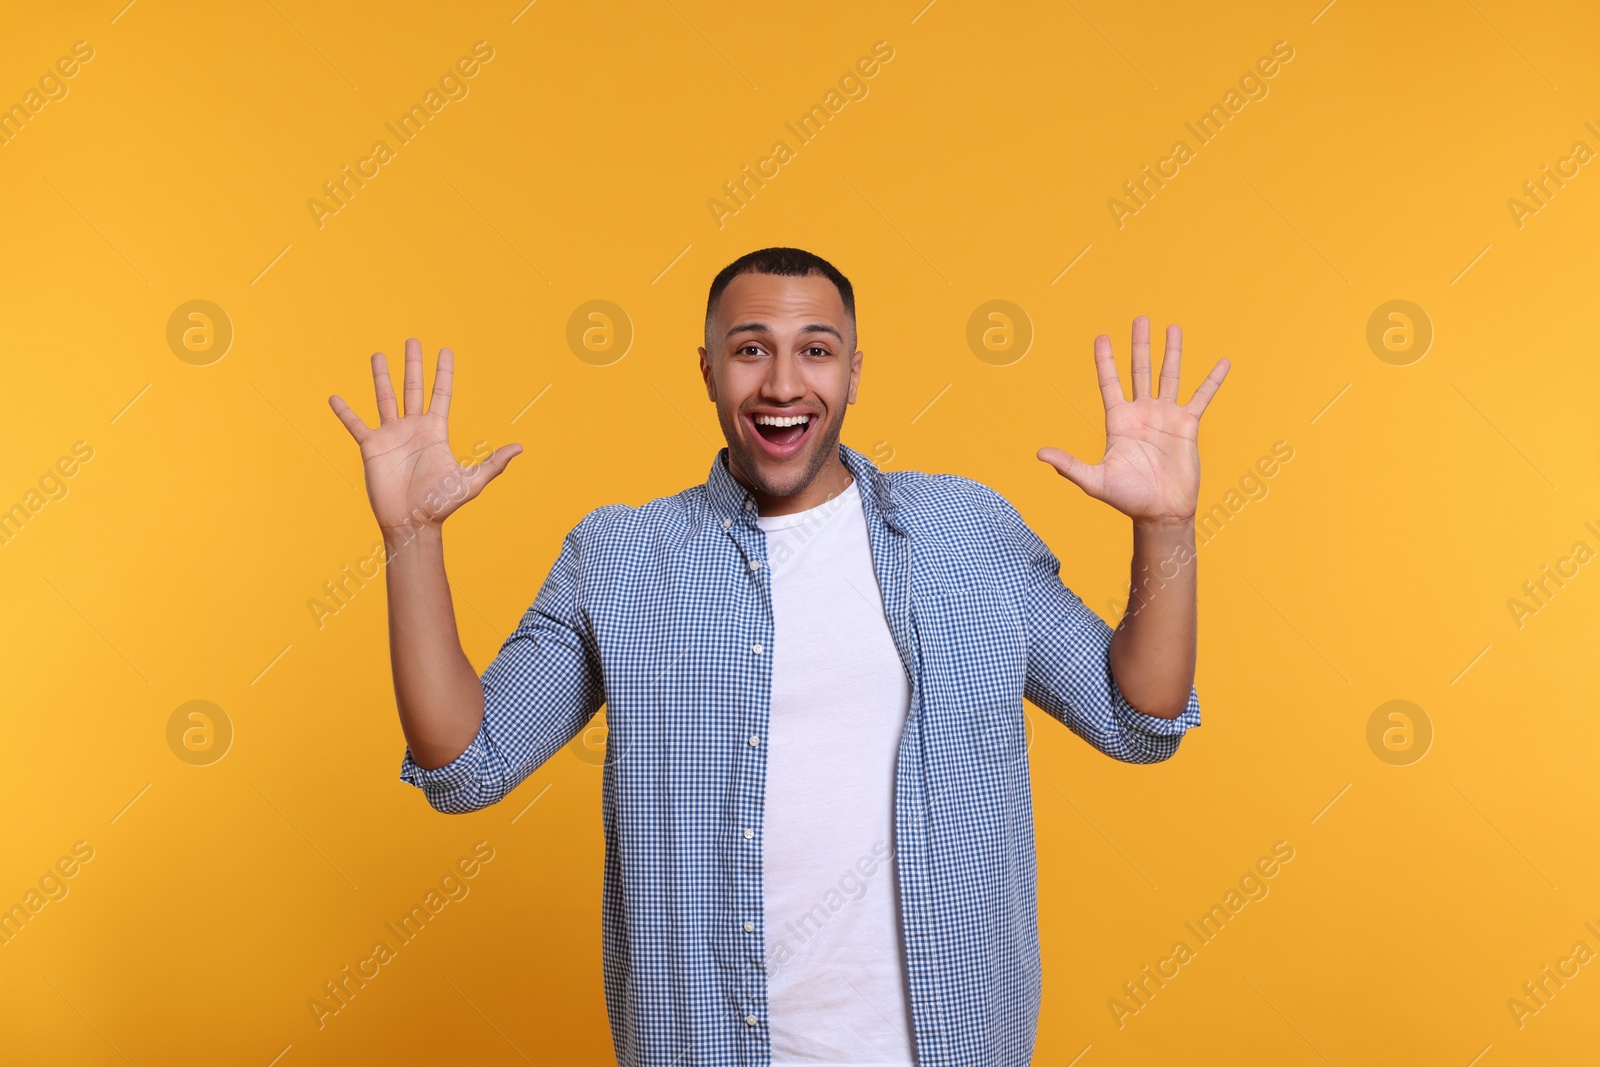 Photo of Man giving high five with both hands on yellow background